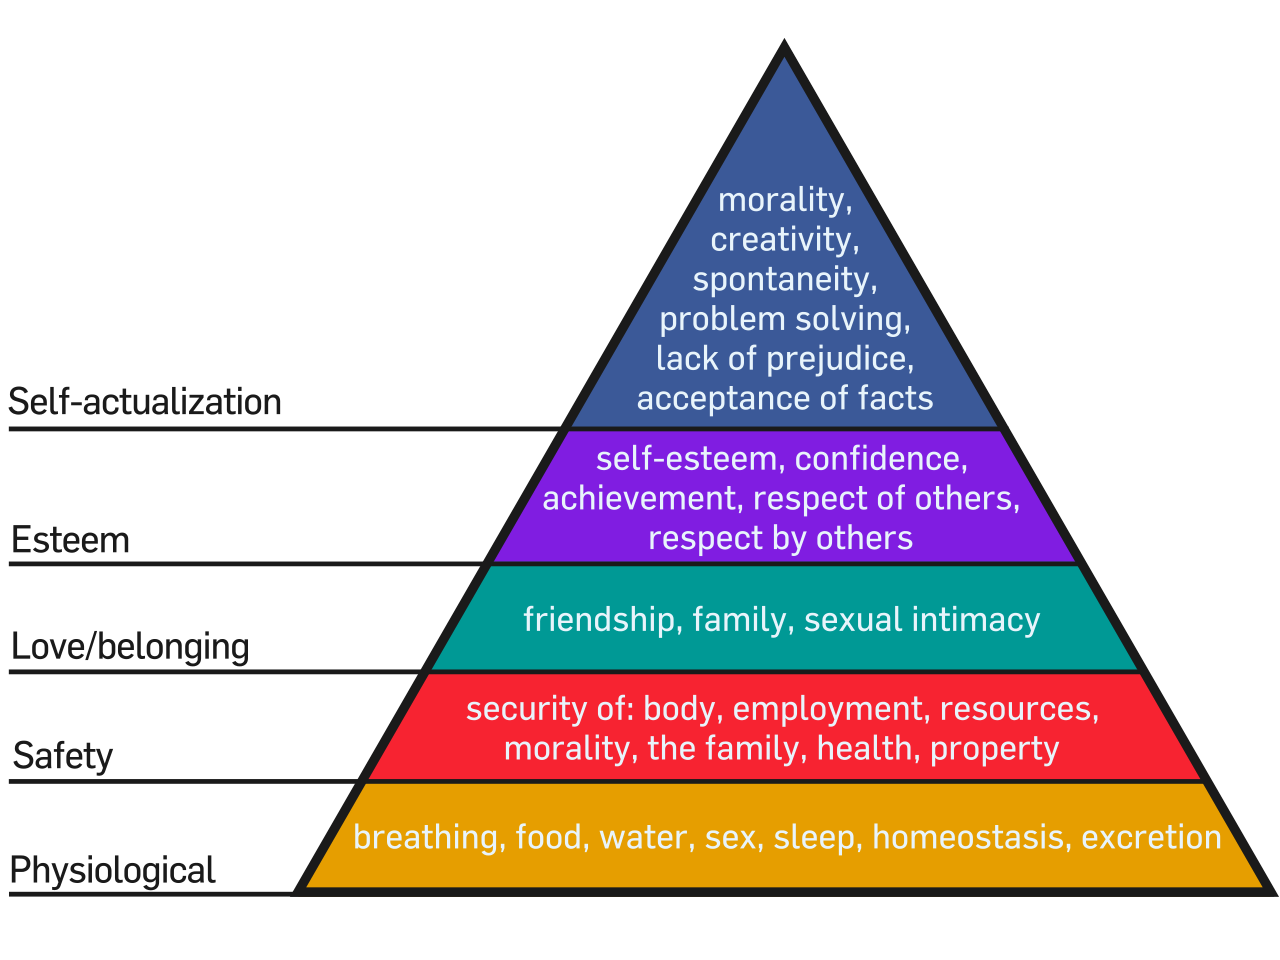 Maslow's hierarchy of needs from top to bottom: Self-actualization, Esteem, Love/belonging, Safety, Physiological. 